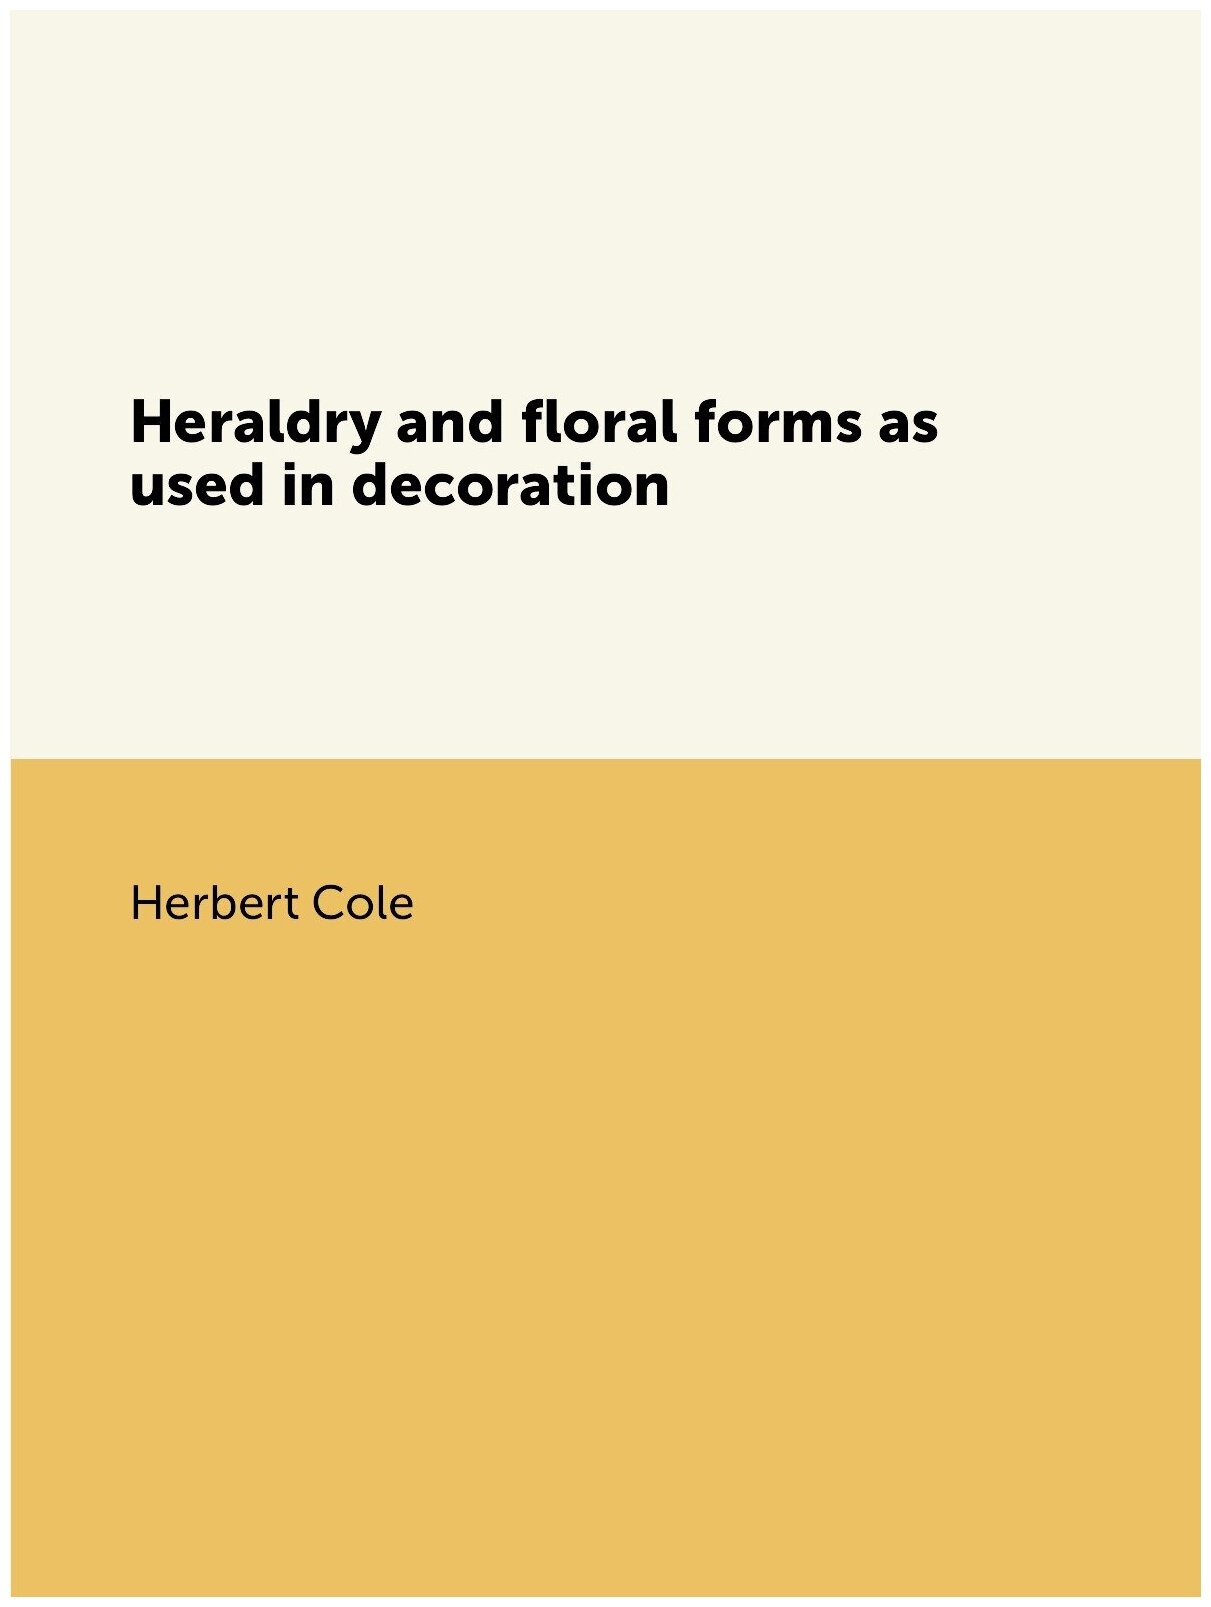 Heraldry and floral forms as used in decoration